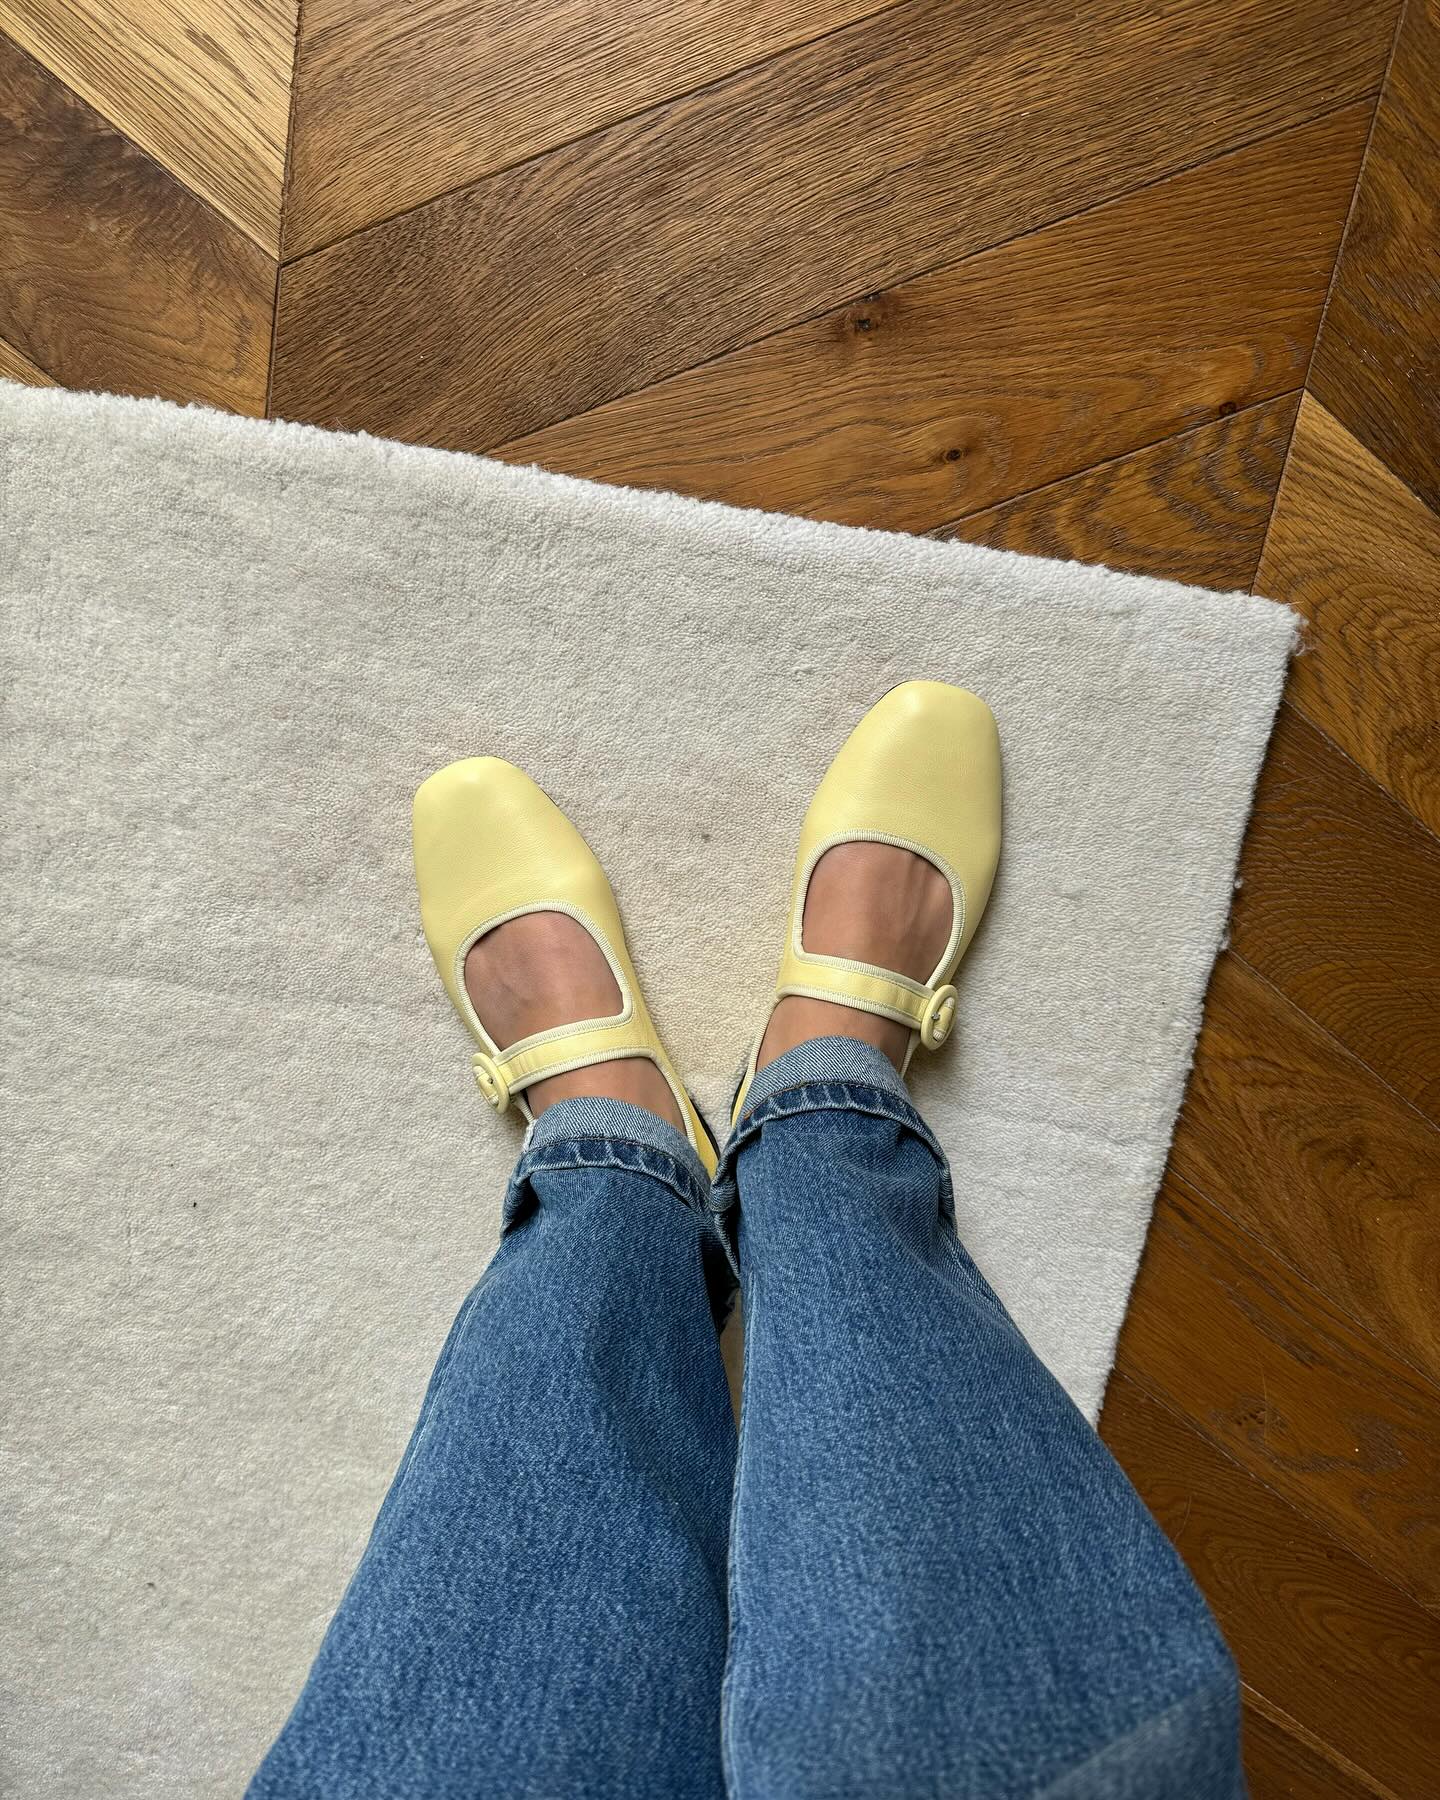 A woman wearing flat Mary-Janes with jeans